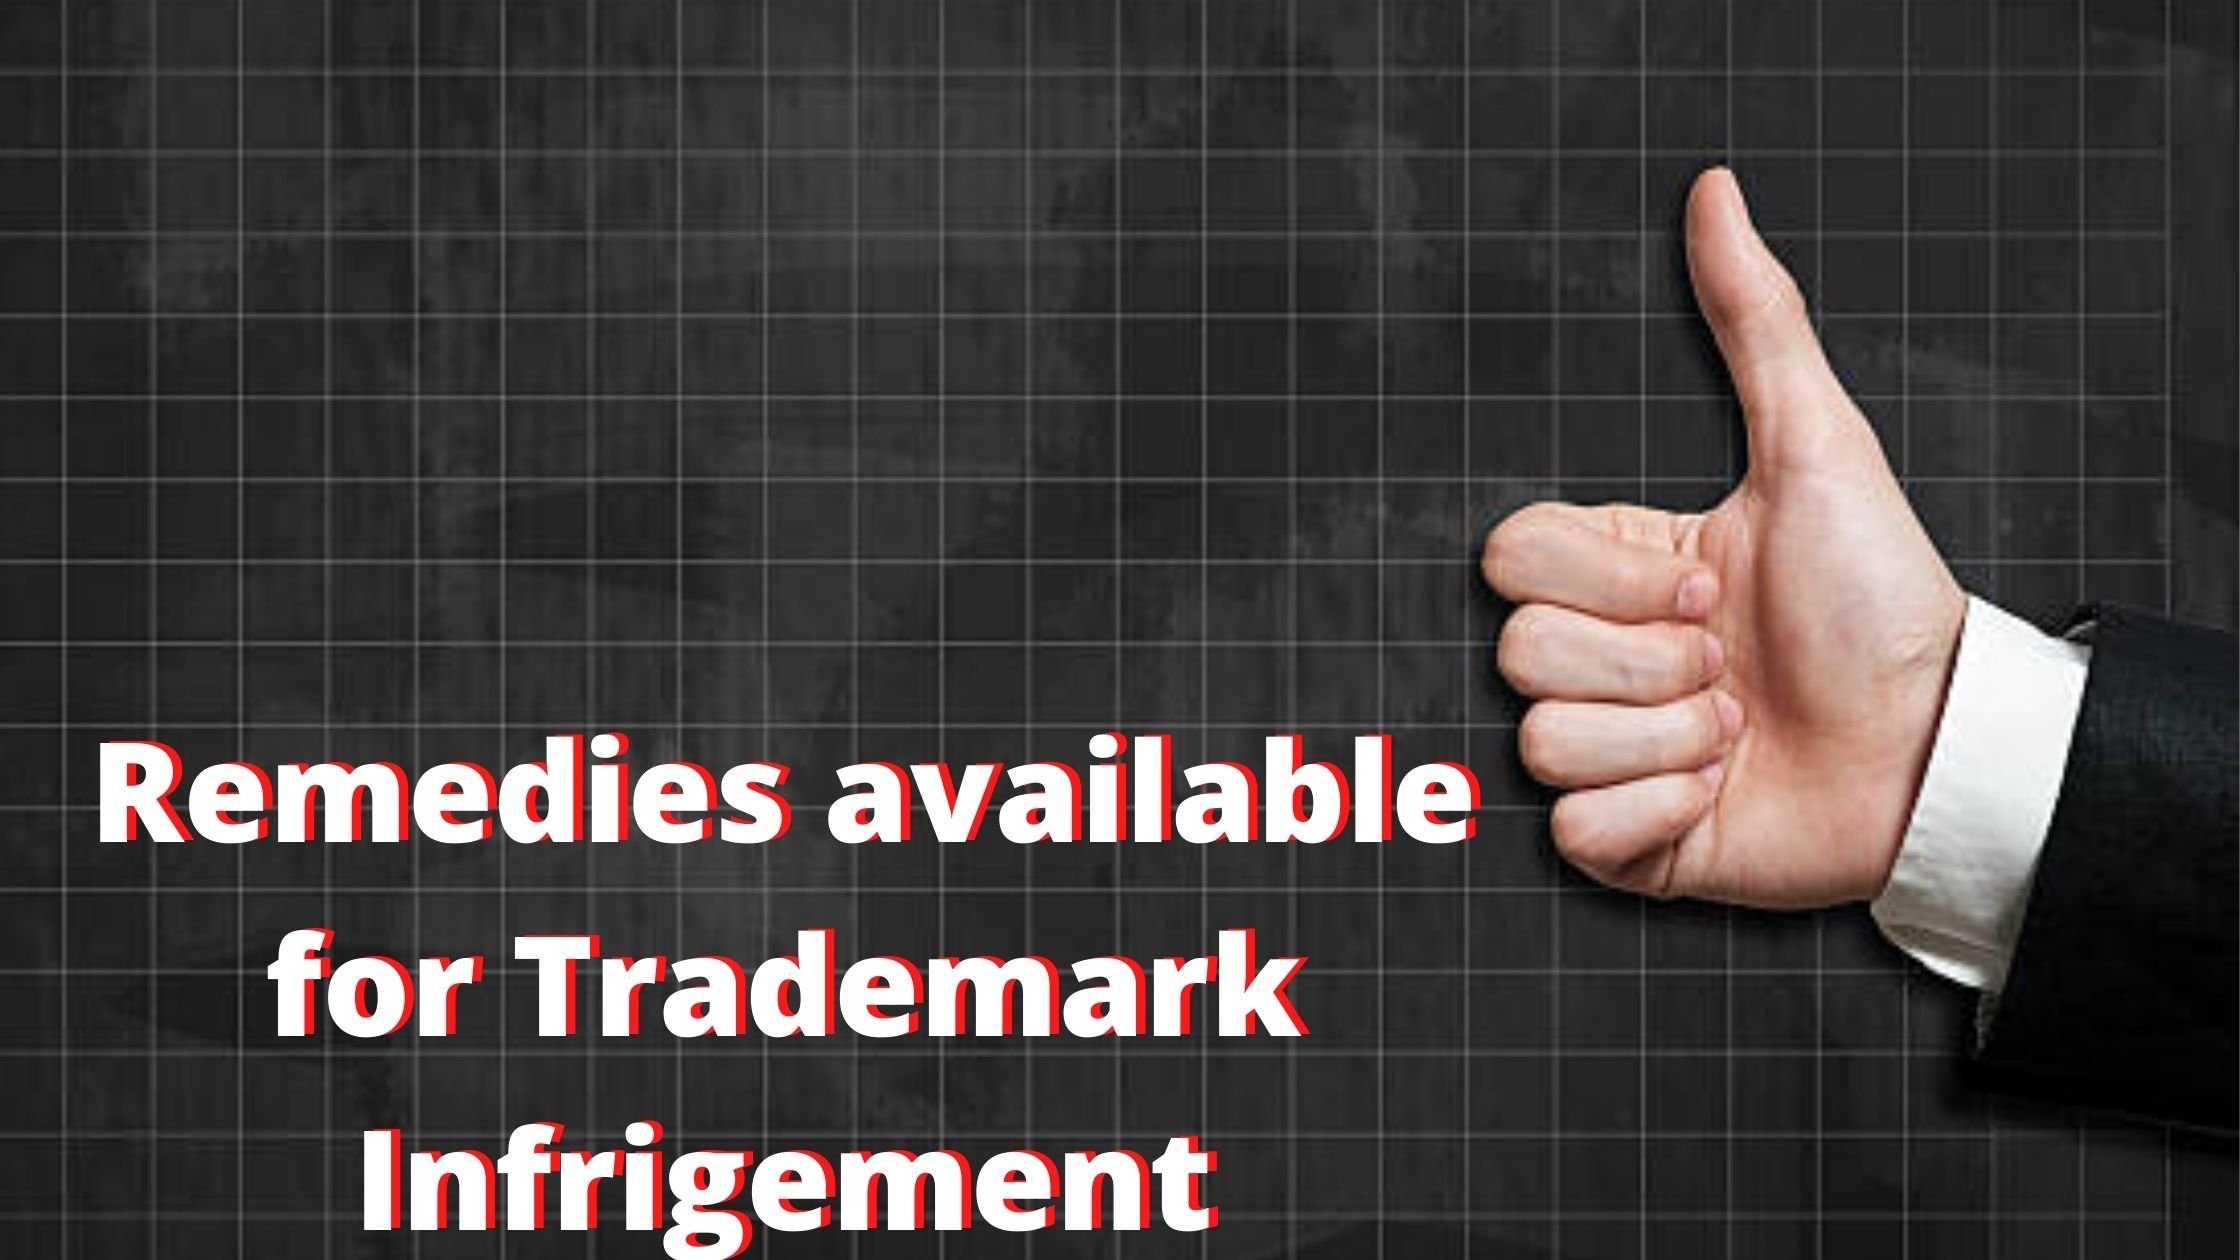 Remedies available for Trademark Infringement